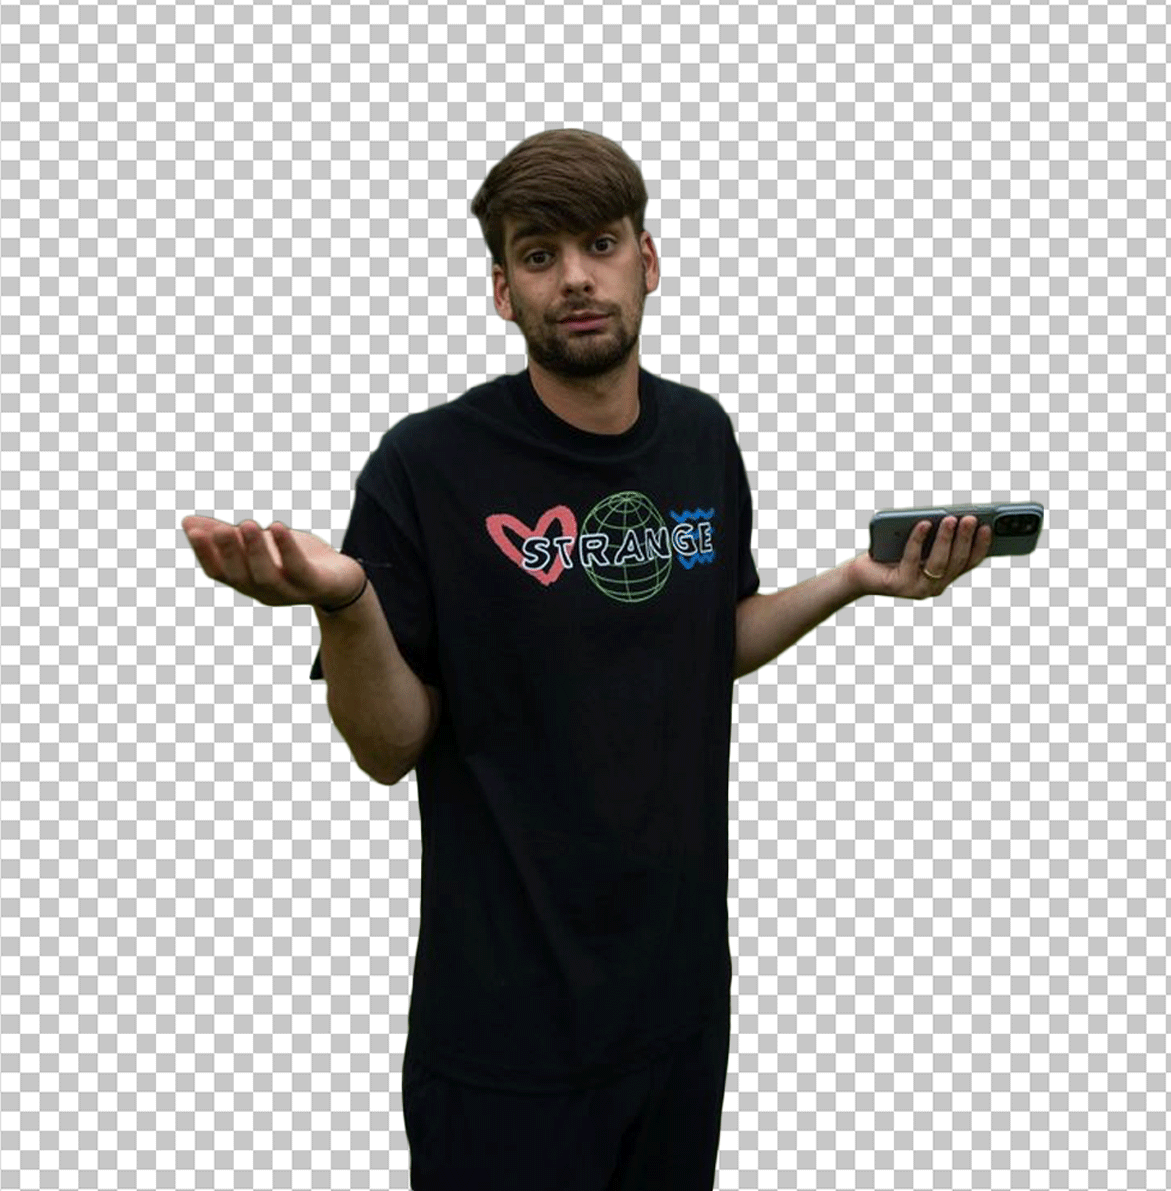 Chandler Hallow is wearing a black t-shirt Transparent PNG Image